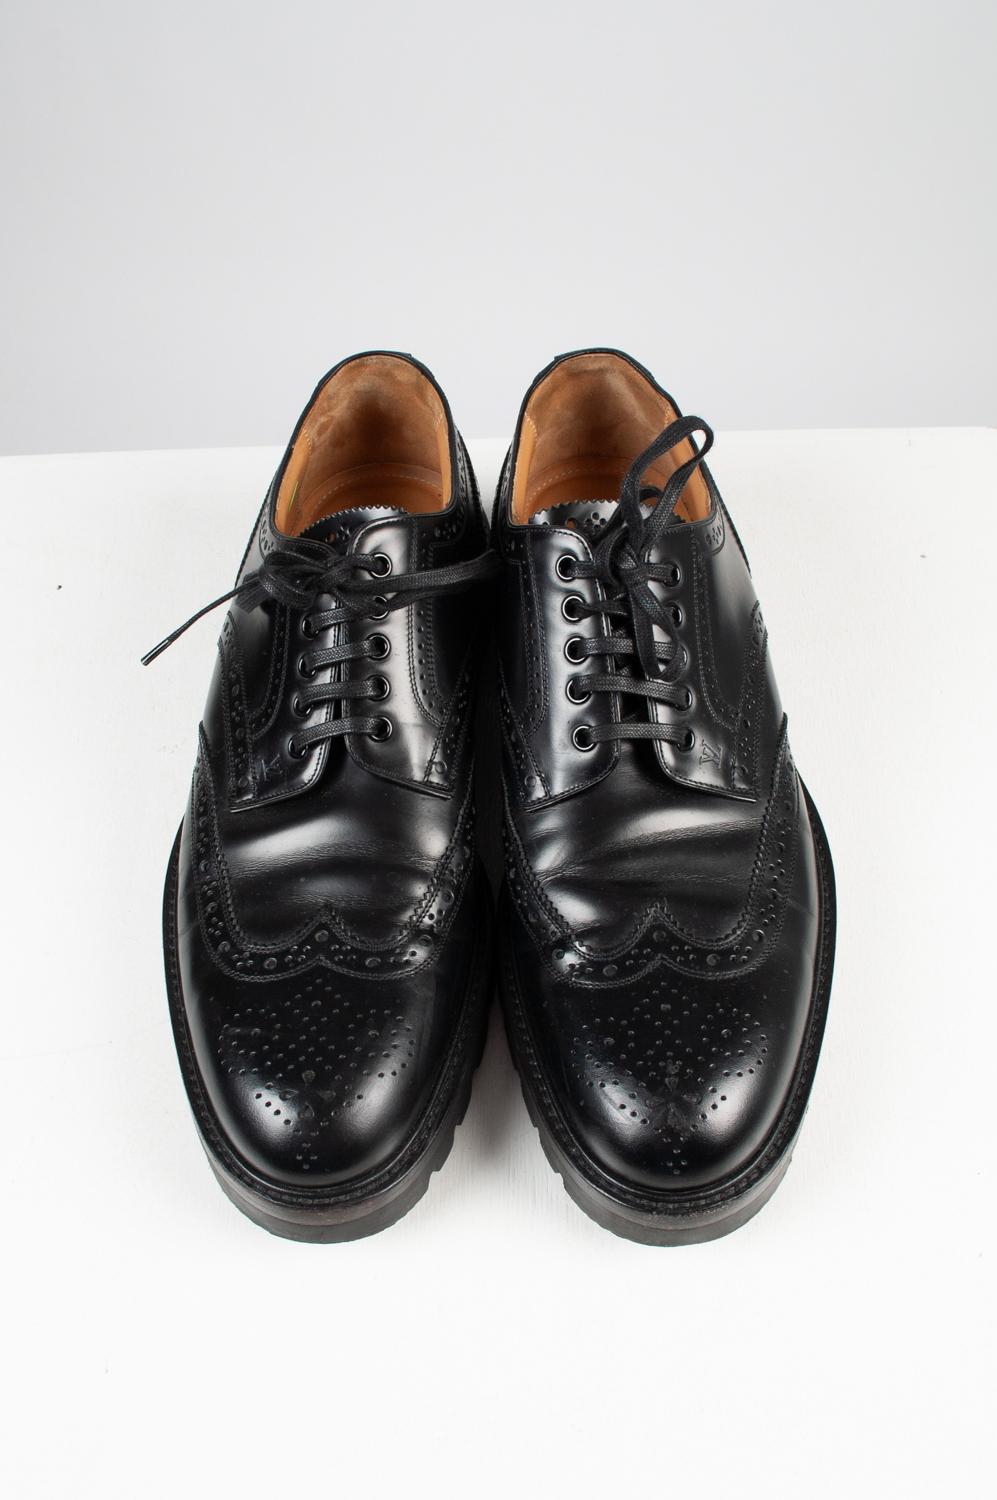 100% genuine Louis Vuitton Oxford Men Shoes, S570
Comes with dustbag.
Color: Back
(An actual color may a bit vary due to individual computer screen interpretation)
Material: Leather,
Tag size: 10USA, UK9, EUR44
These shoes are great quality item.